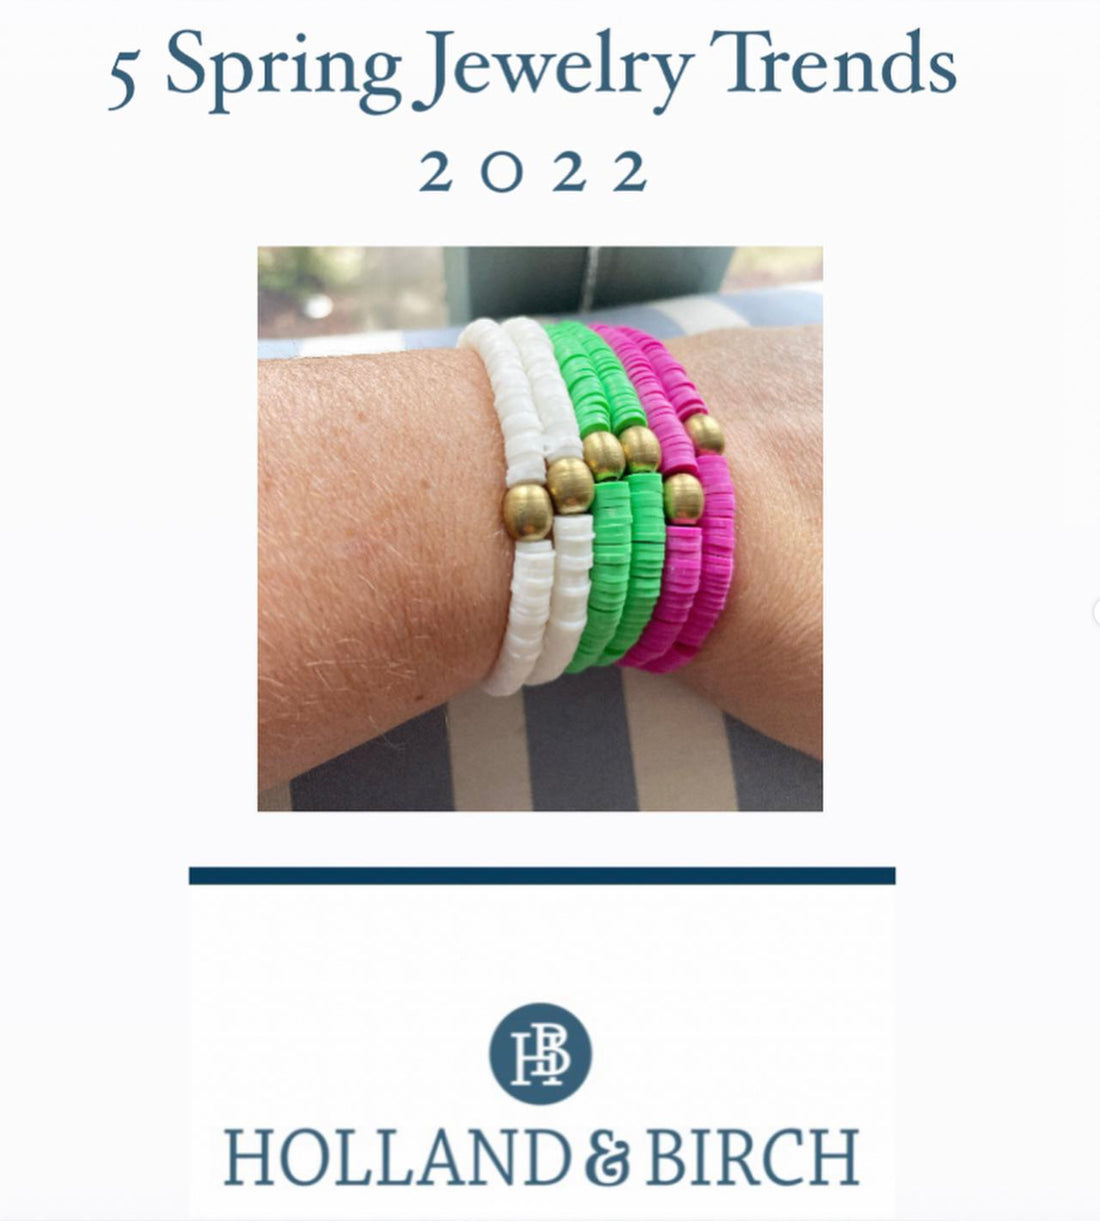 5 Spring Jewelry Trends